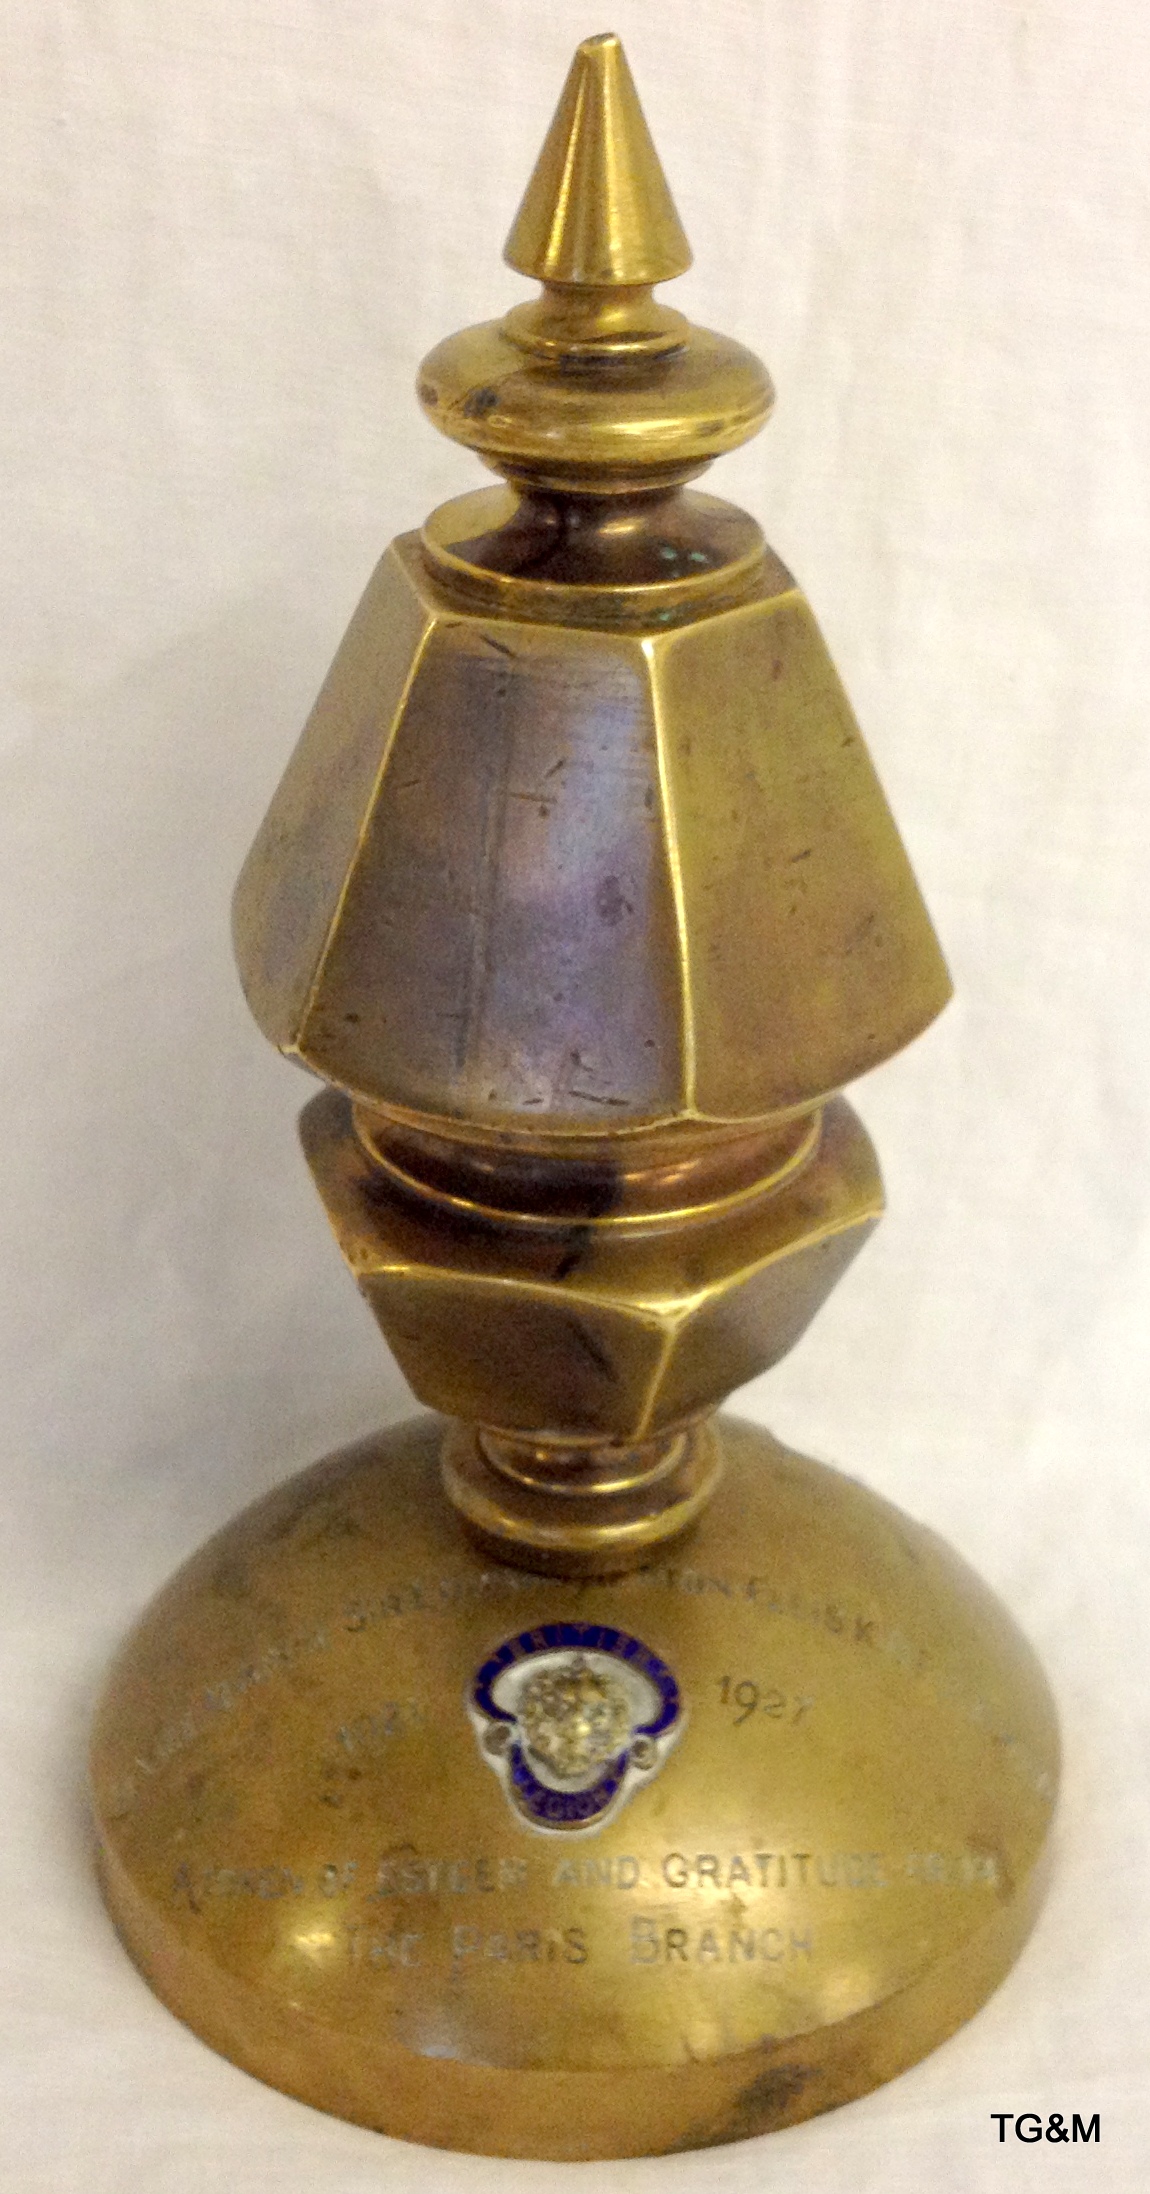 A very heavy desk ornament from the Paris branch of the British Legion in 1927 presented to Vice